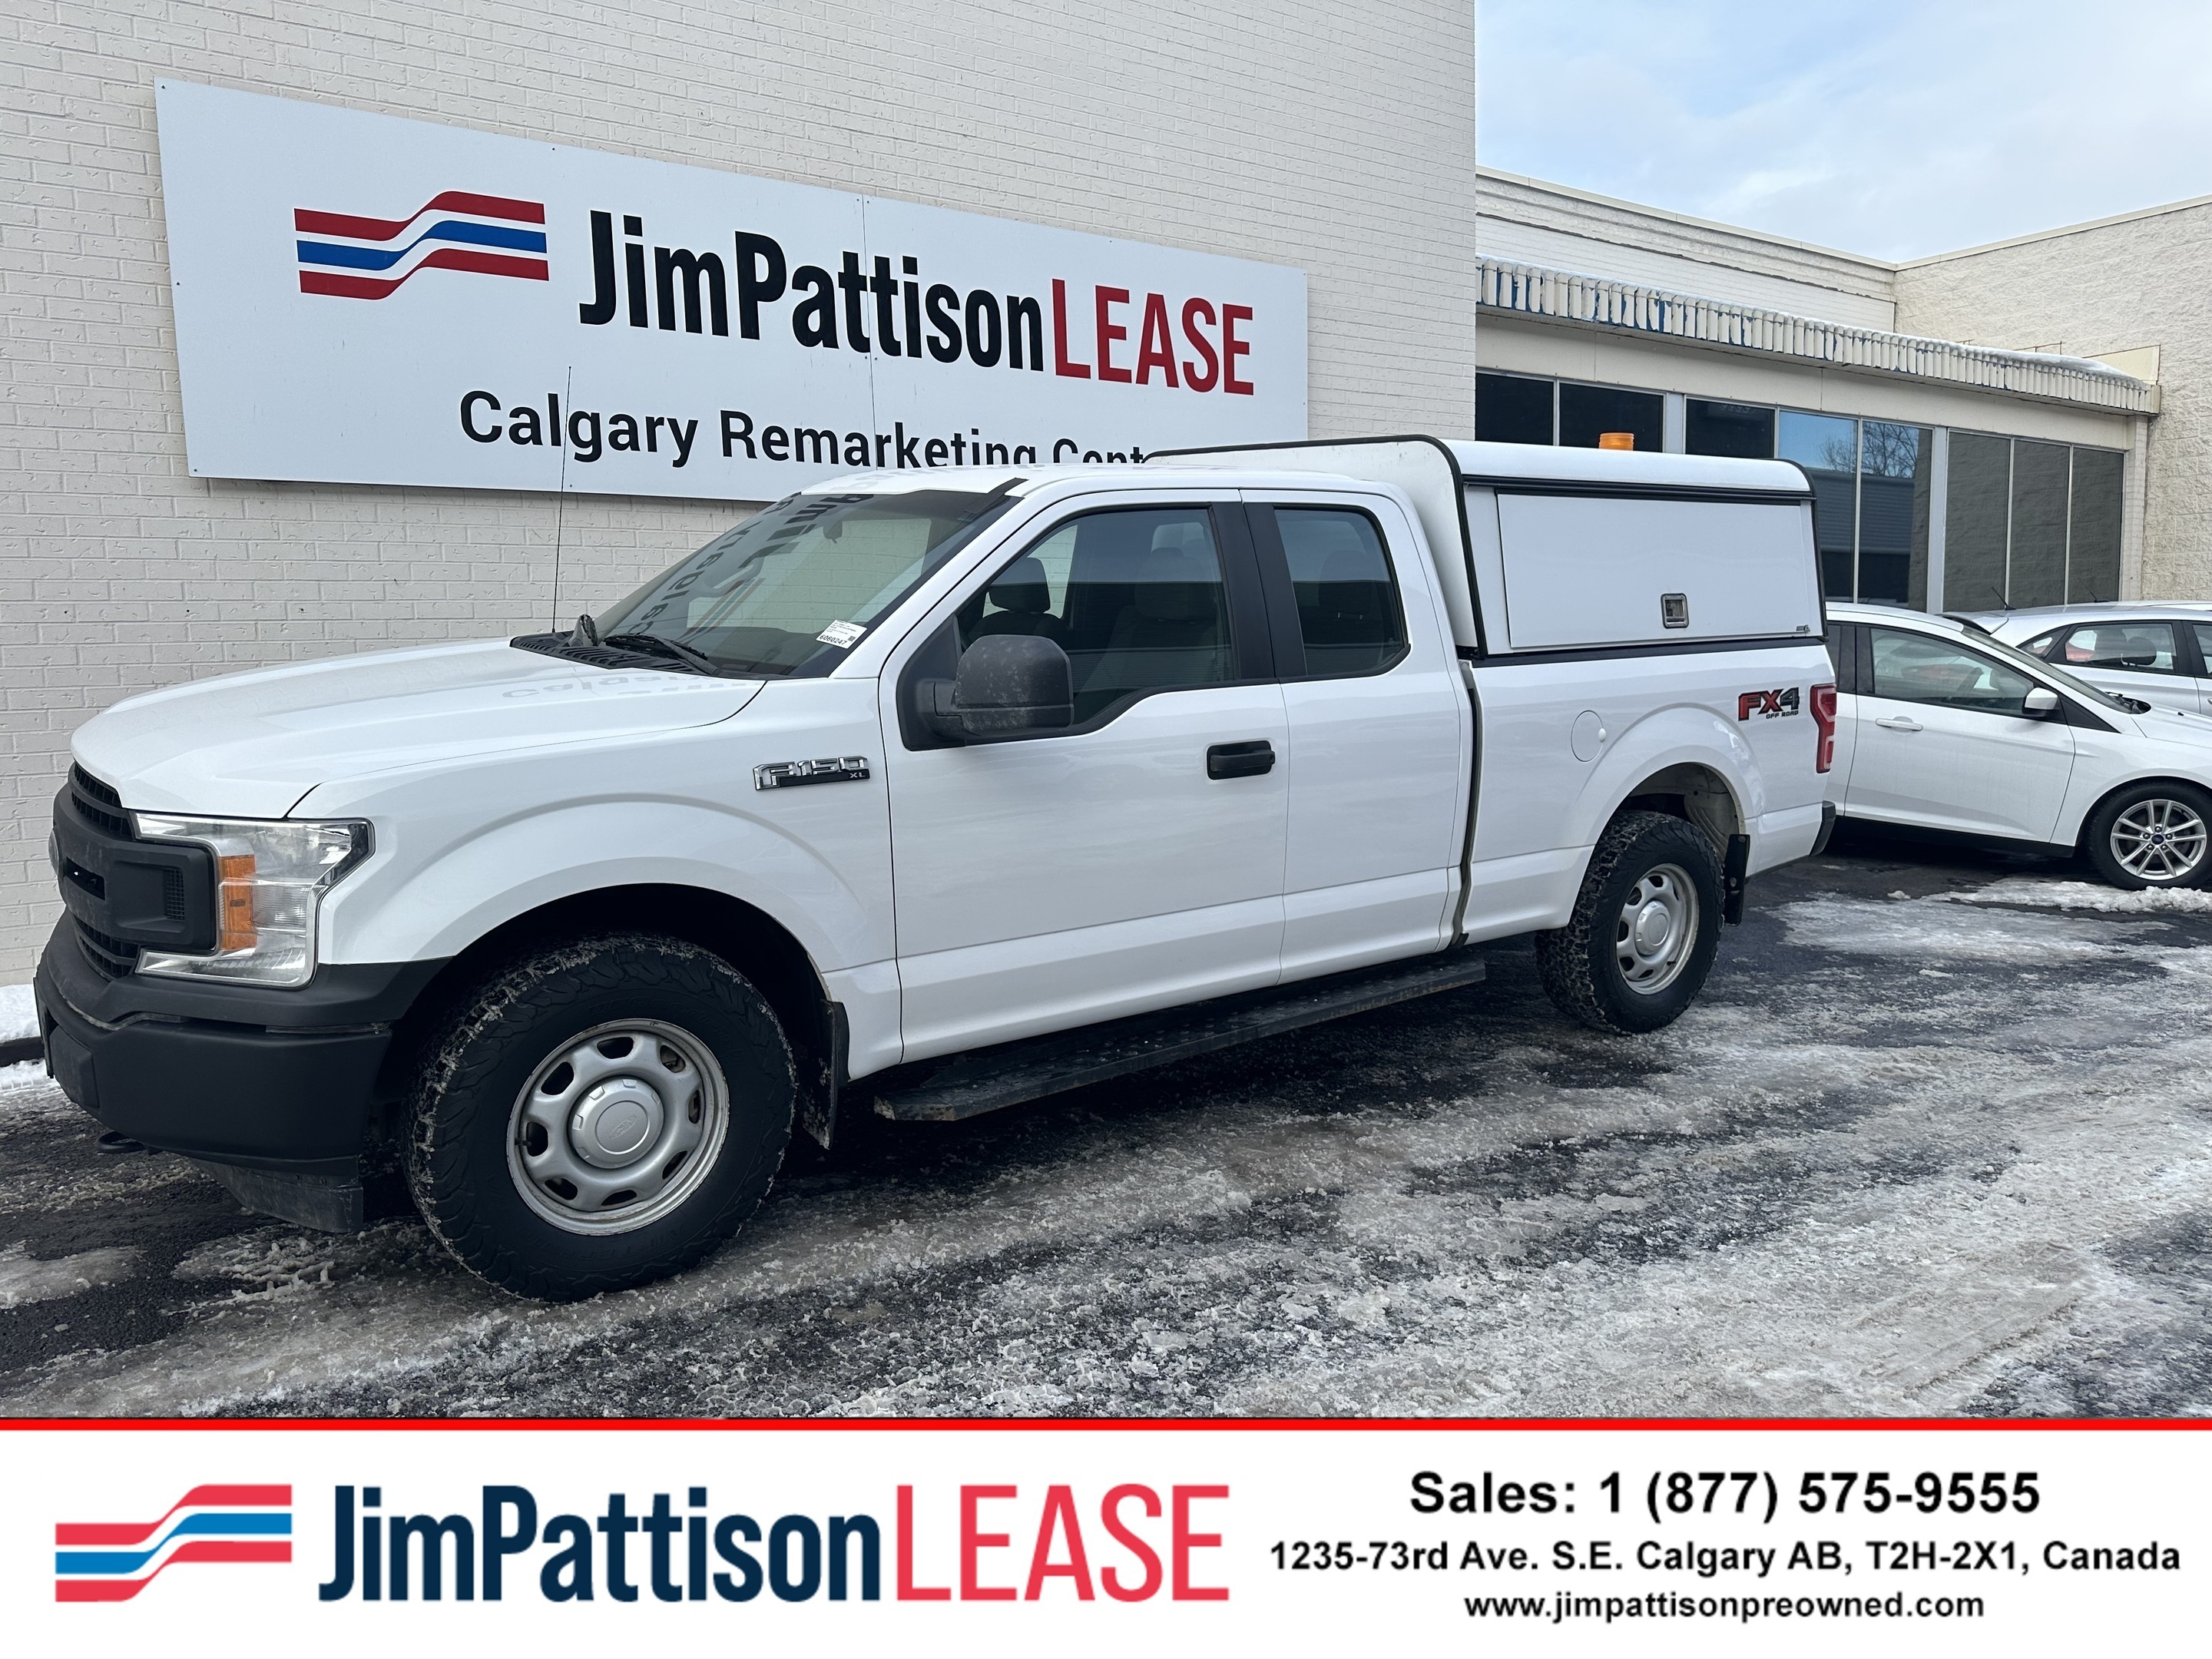 2018 Ford F-150 4X4 Extended Cab w/Contractor Canopy & Camera.